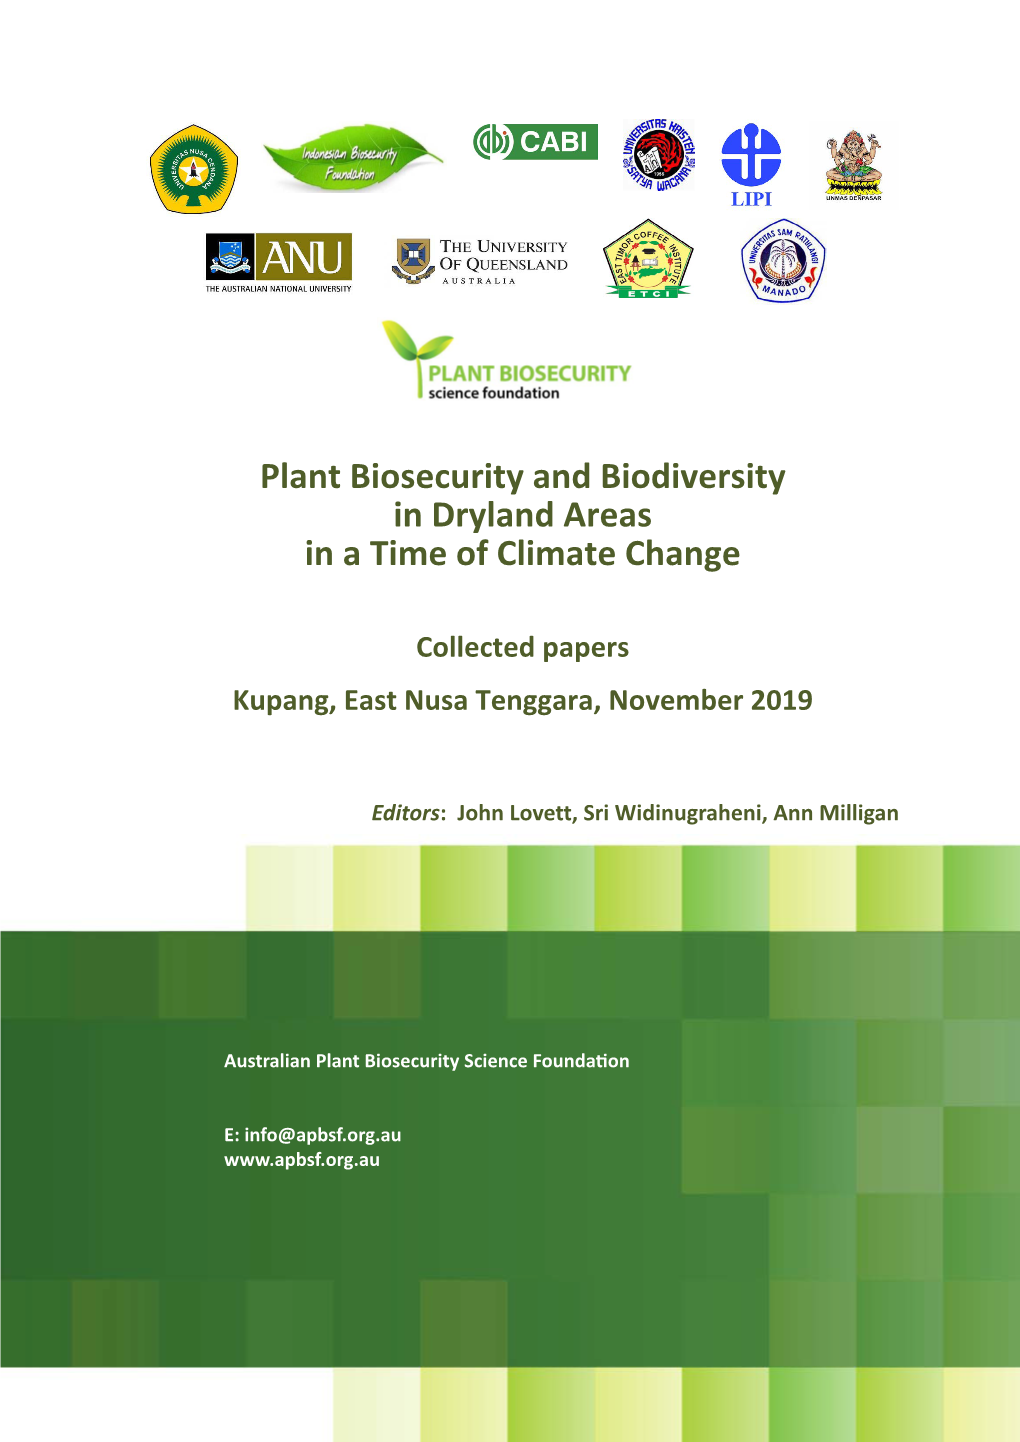 Plant Biosecurity and Biodiversity in Dryland Areas in a Time of Climate Change